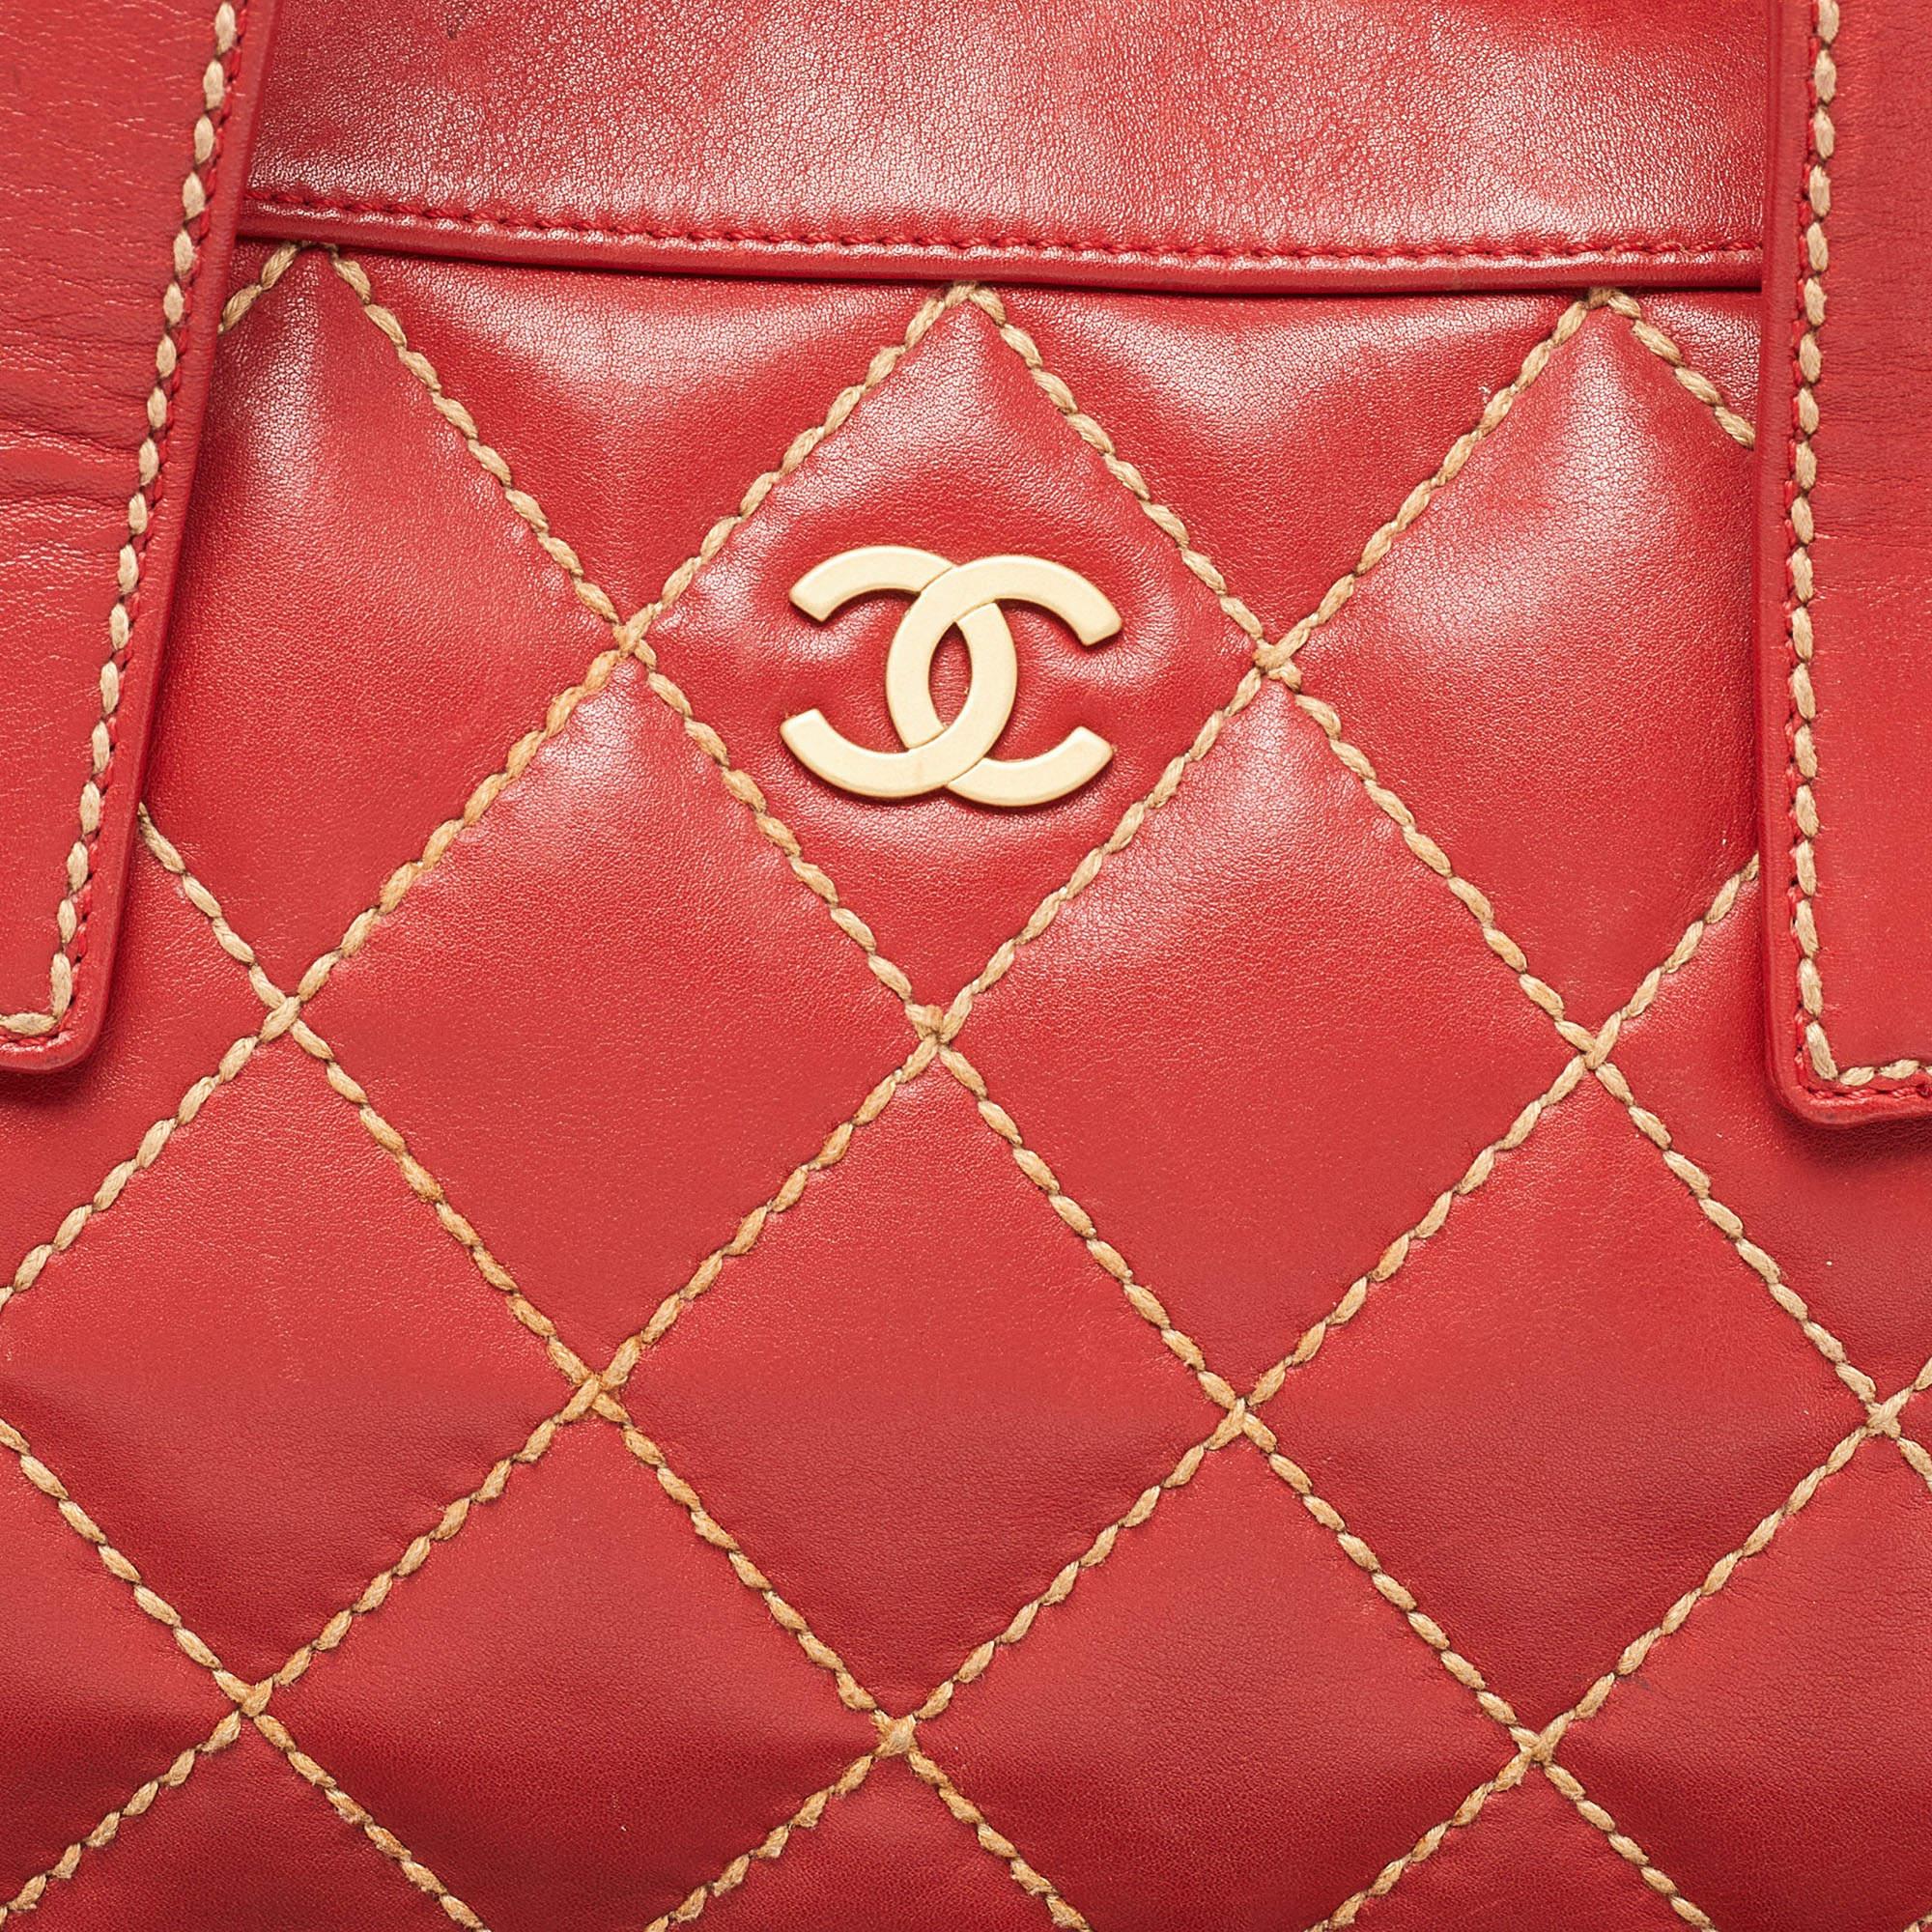 Chanel Red Quilted Leather Surpique Bowler Bag For Sale 9